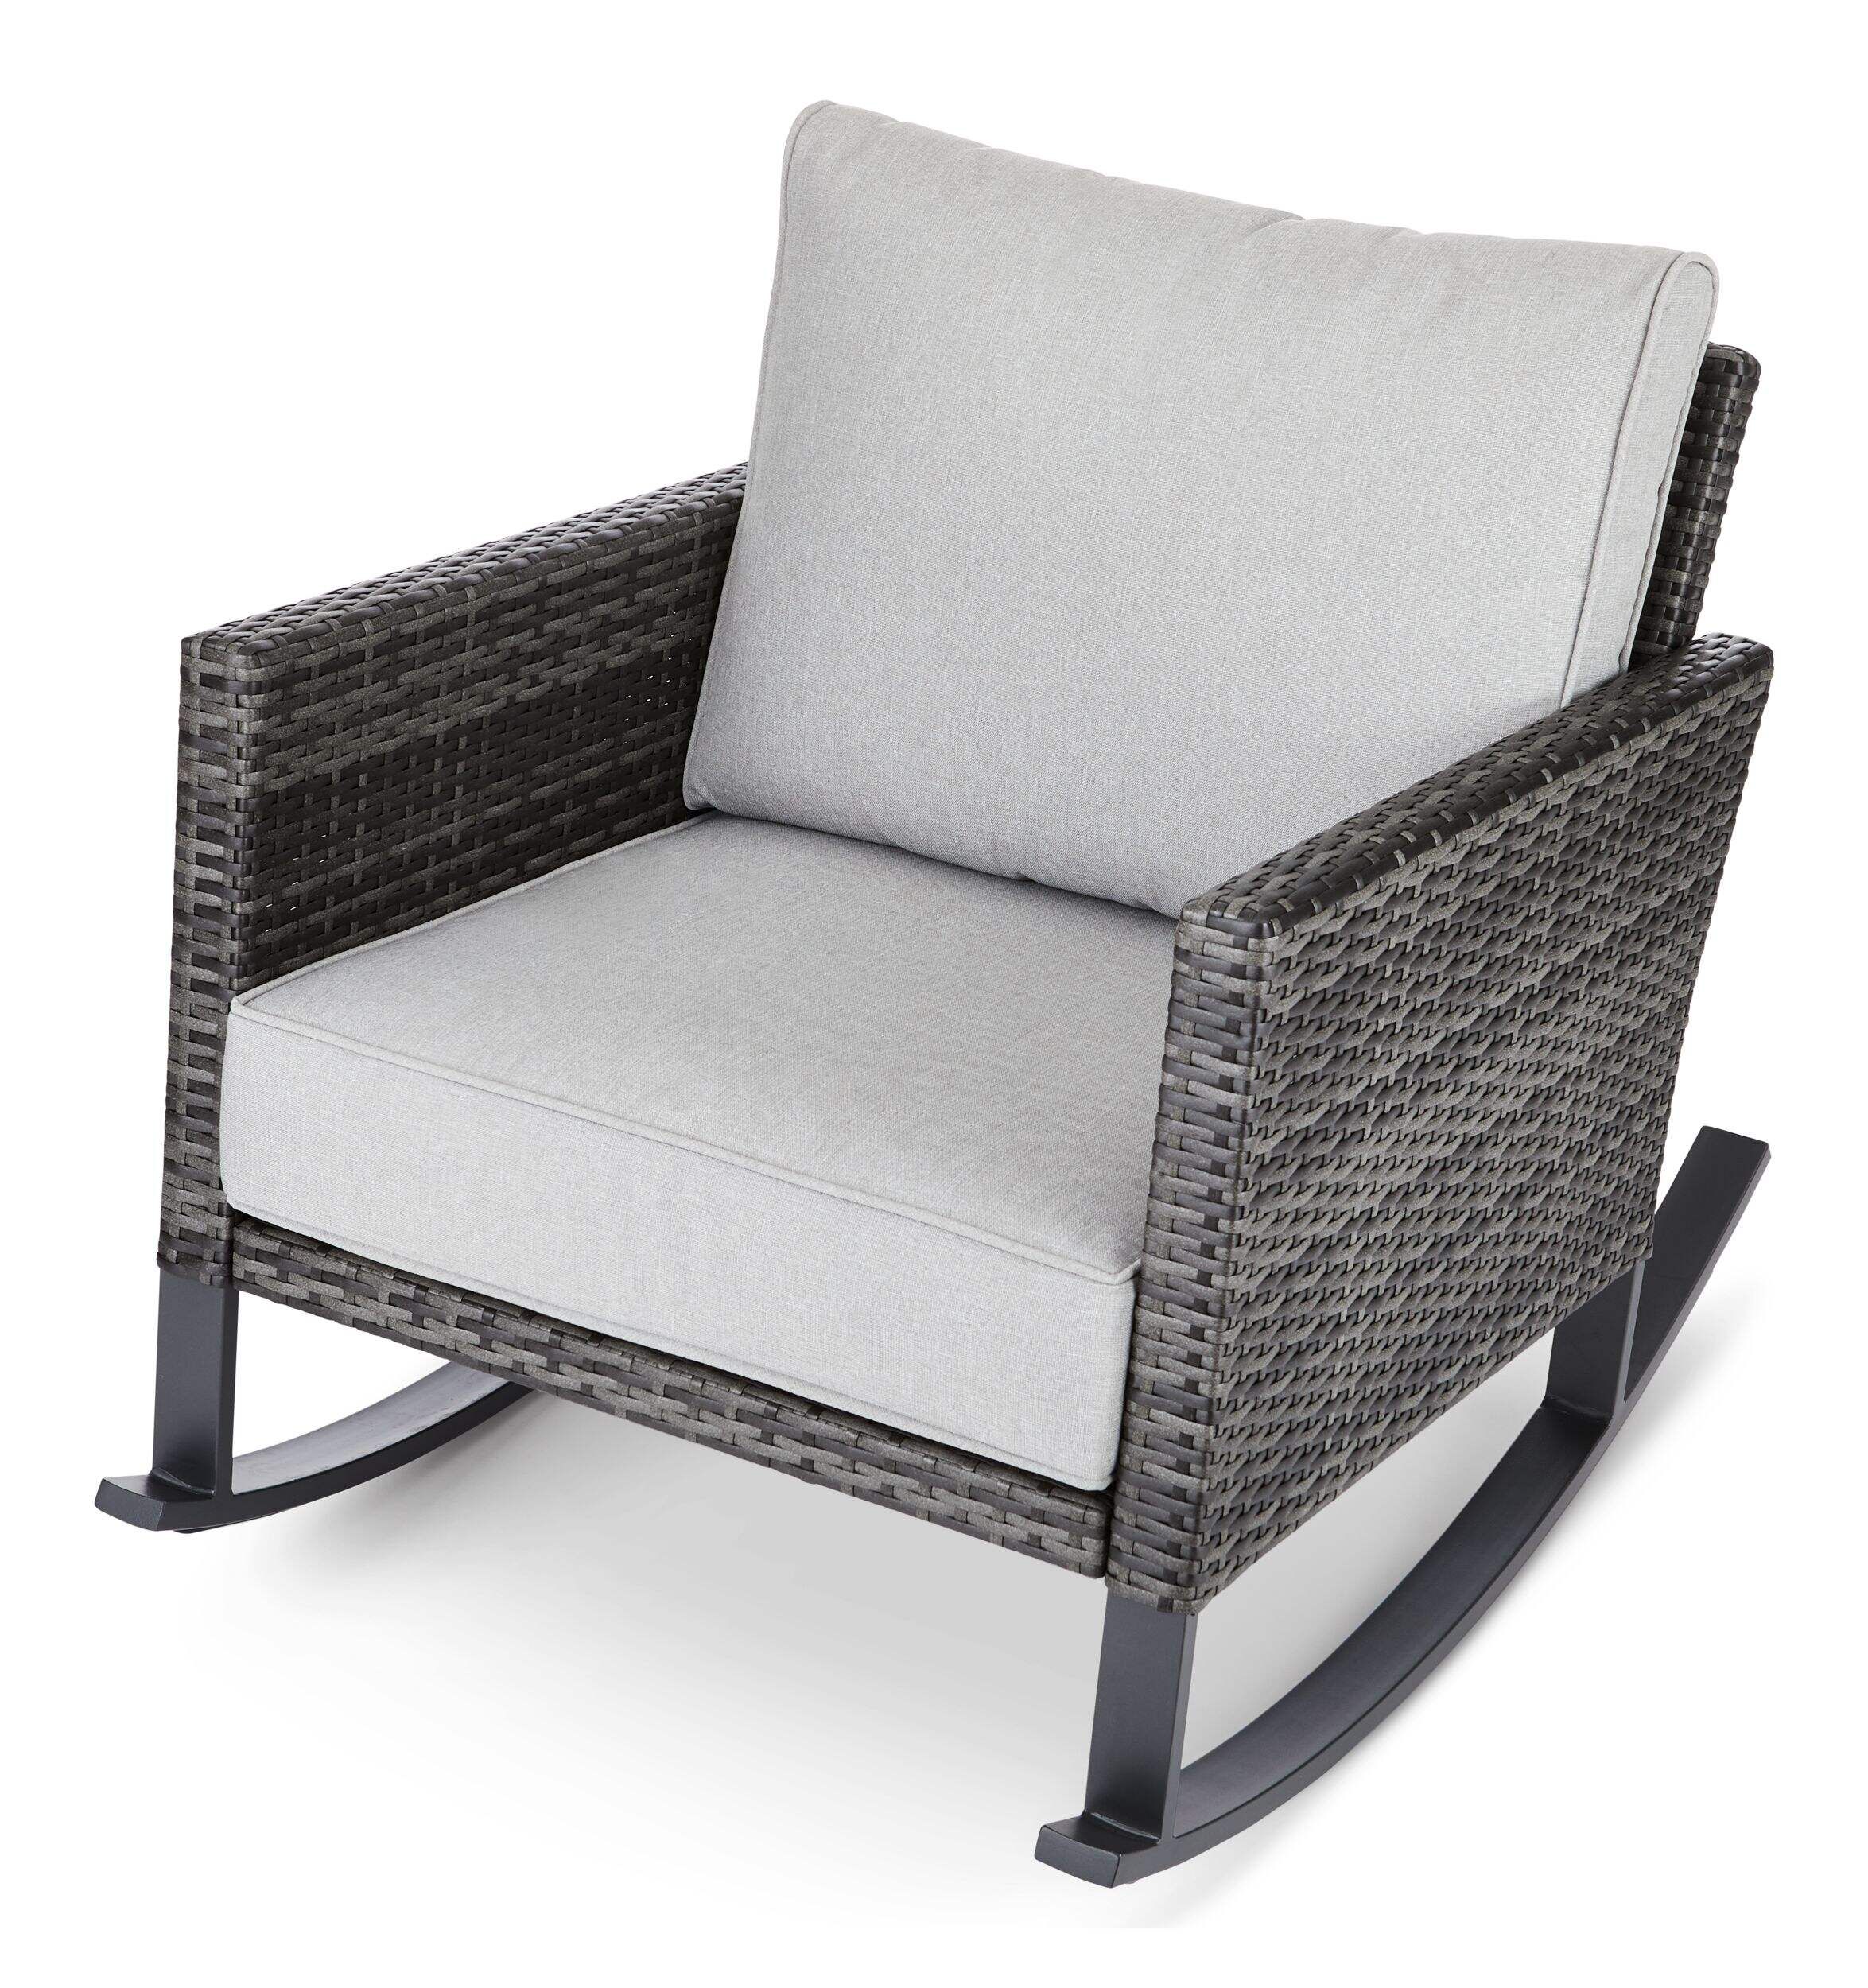 CANVAS Renfrew All-Weather Wicker Outdoor/Patio Rocking Chair w/ Cushions | Canadian Tire